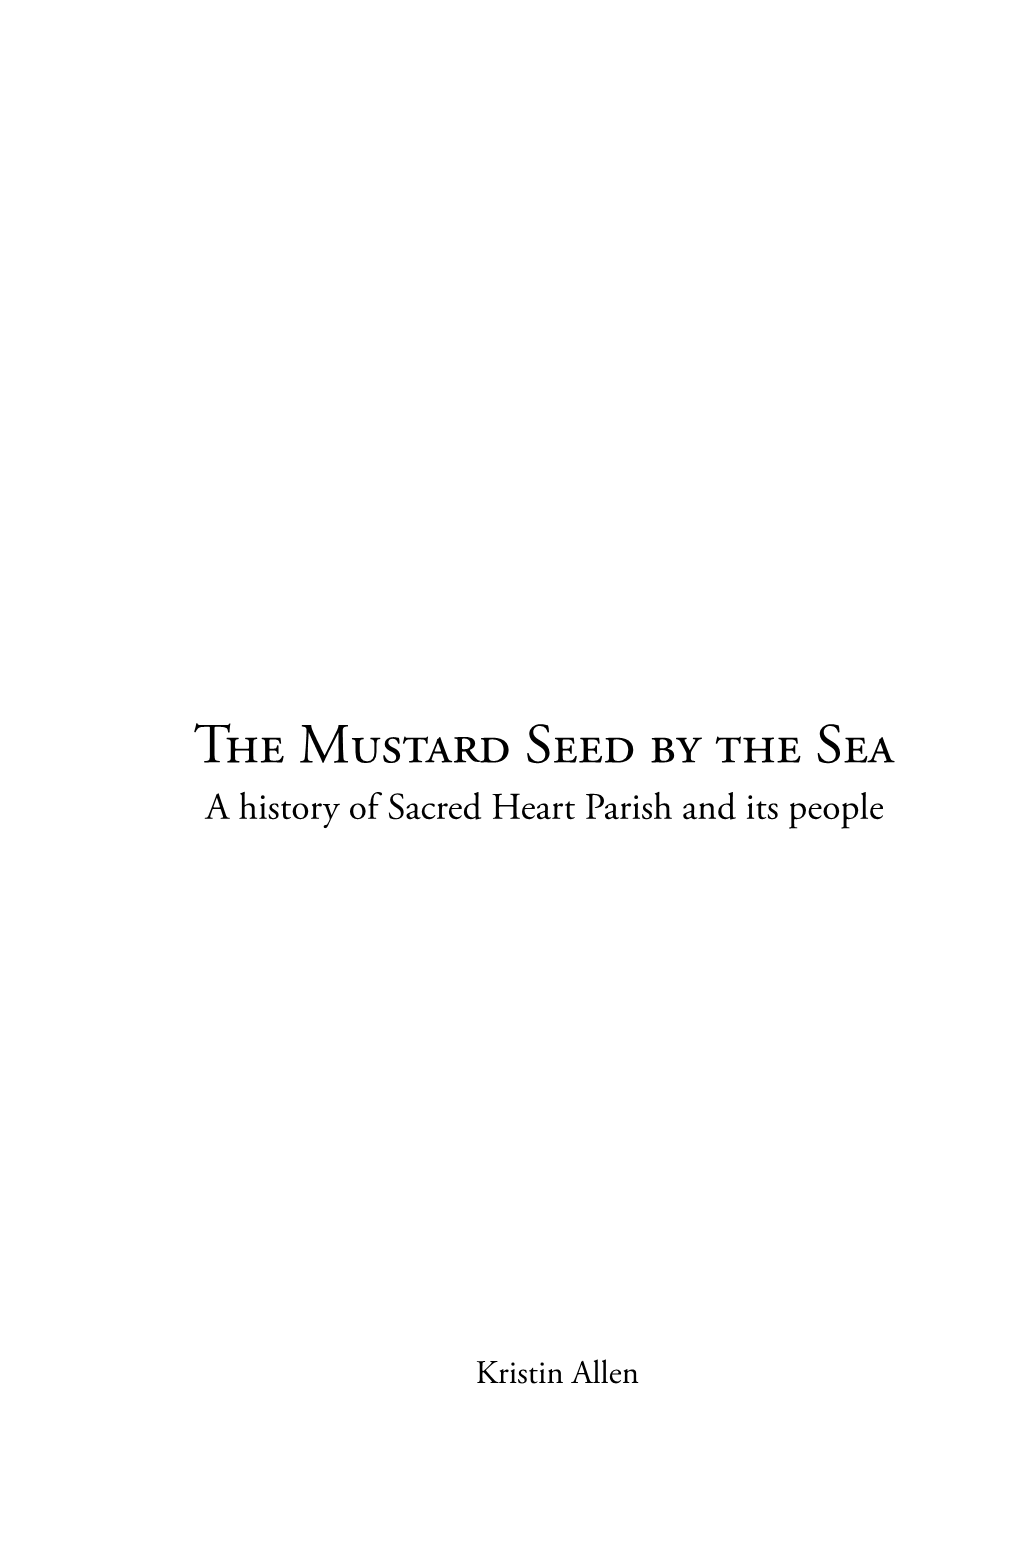 The Mustard Seed by the Sea a History of Sacred Heart Parish and Its People